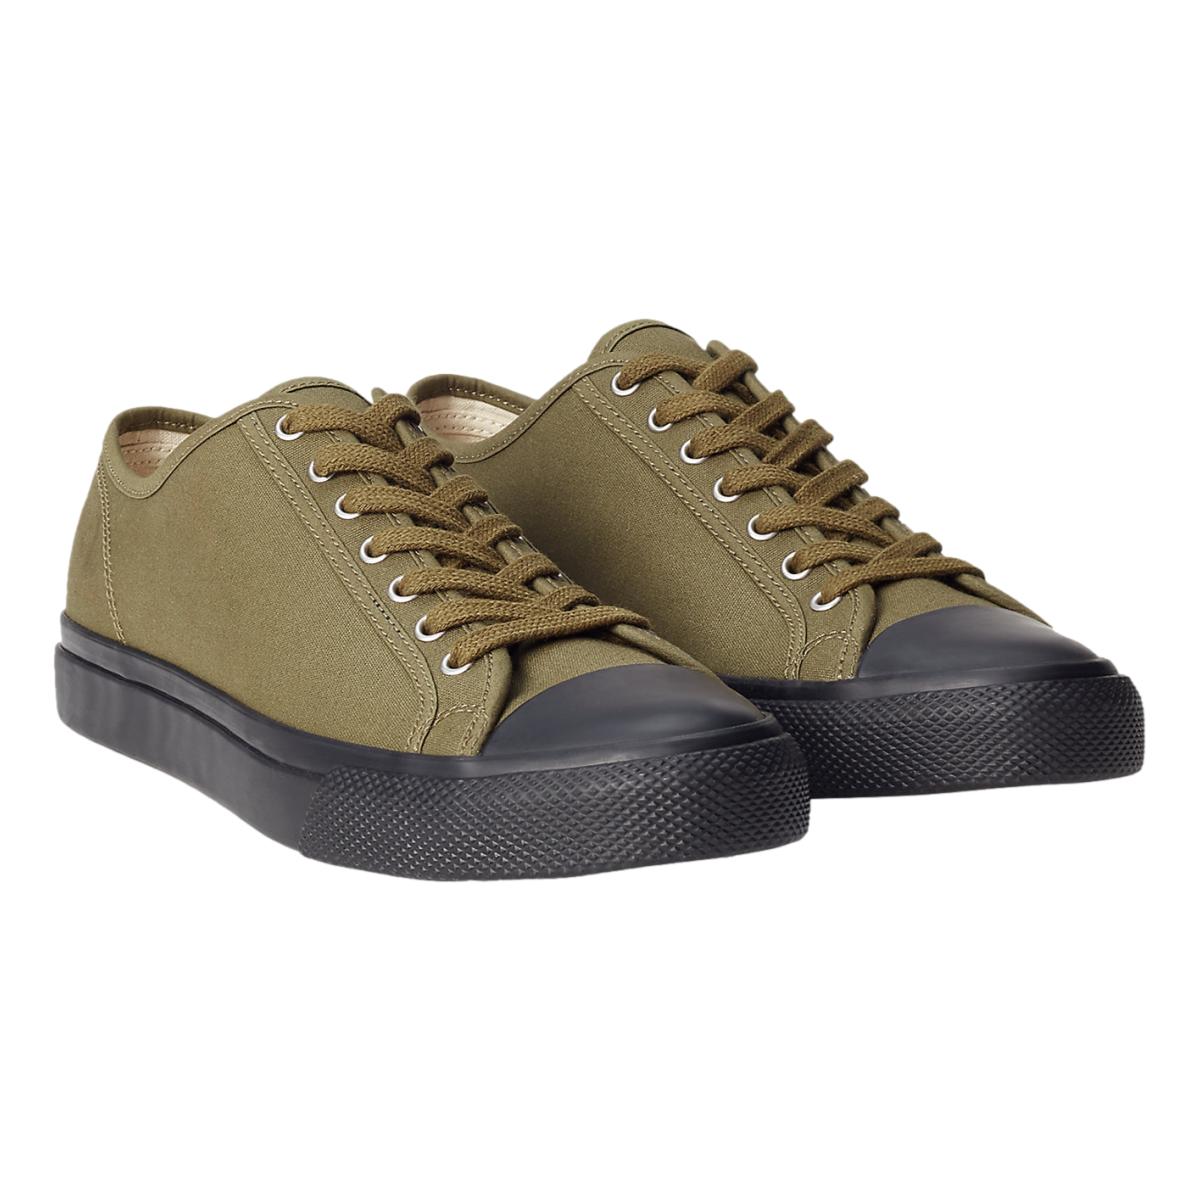 Canvas Sneaker Olive Drab - Shoes